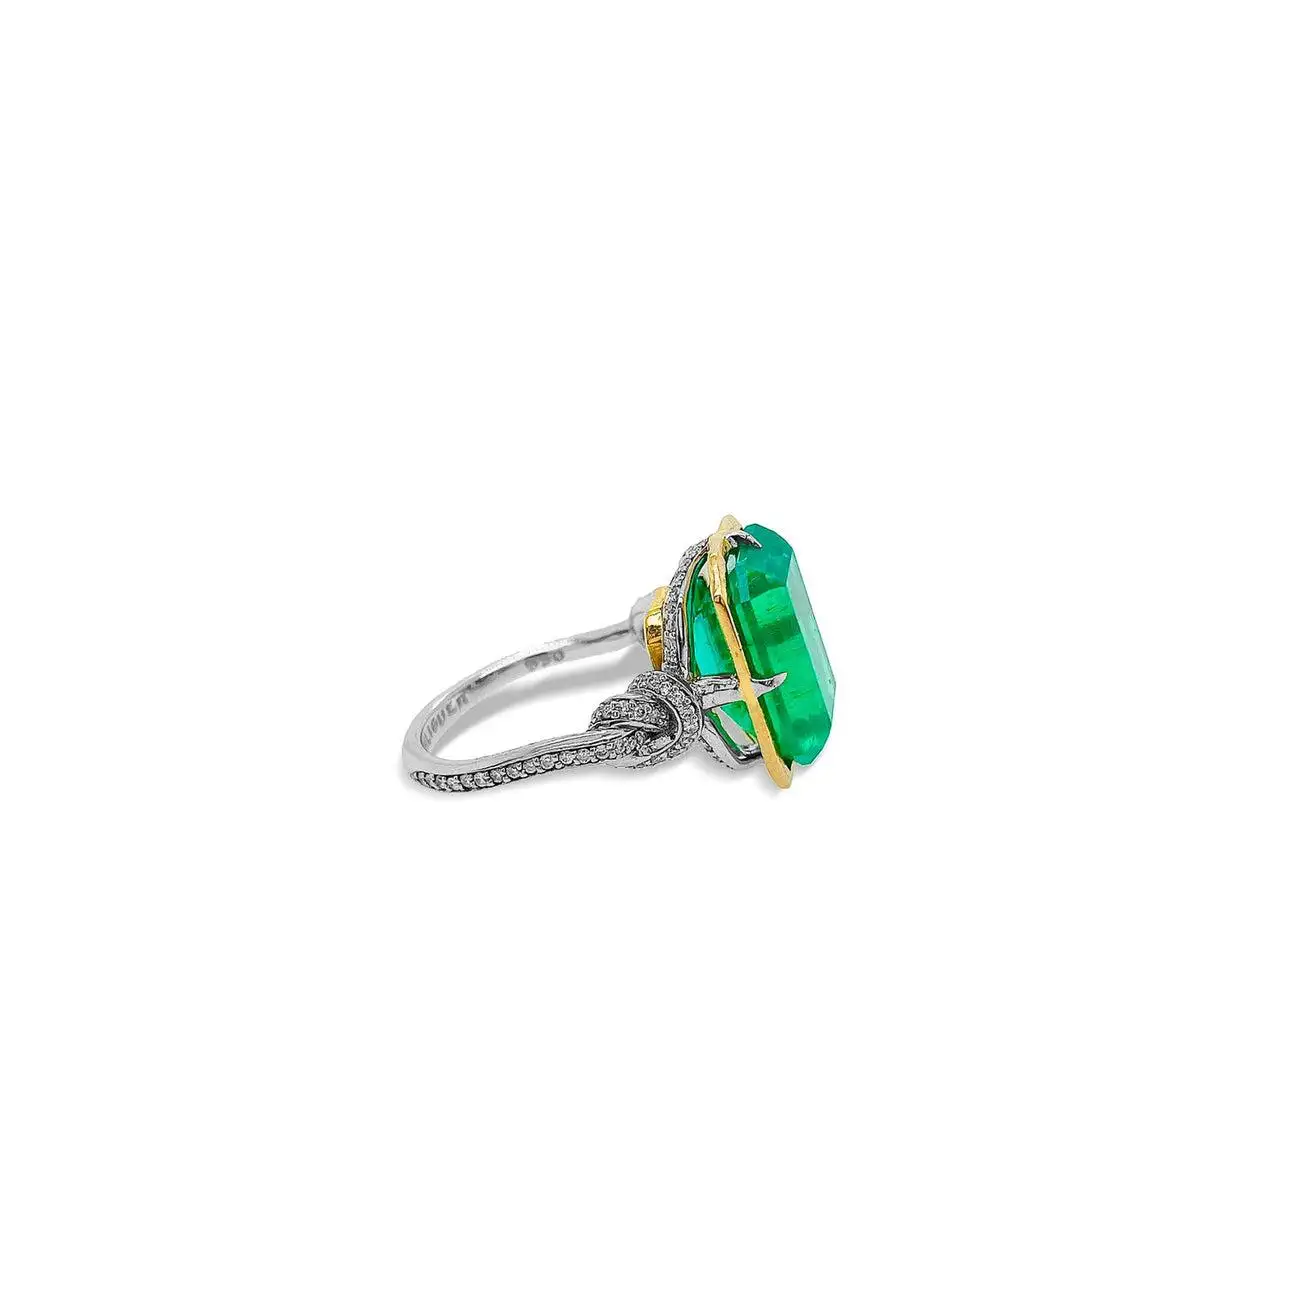 3ct-Emerald-in-Forget-Me-Knot-Ring-Platinum-and-22ct-Yellow-Gold-8.webp